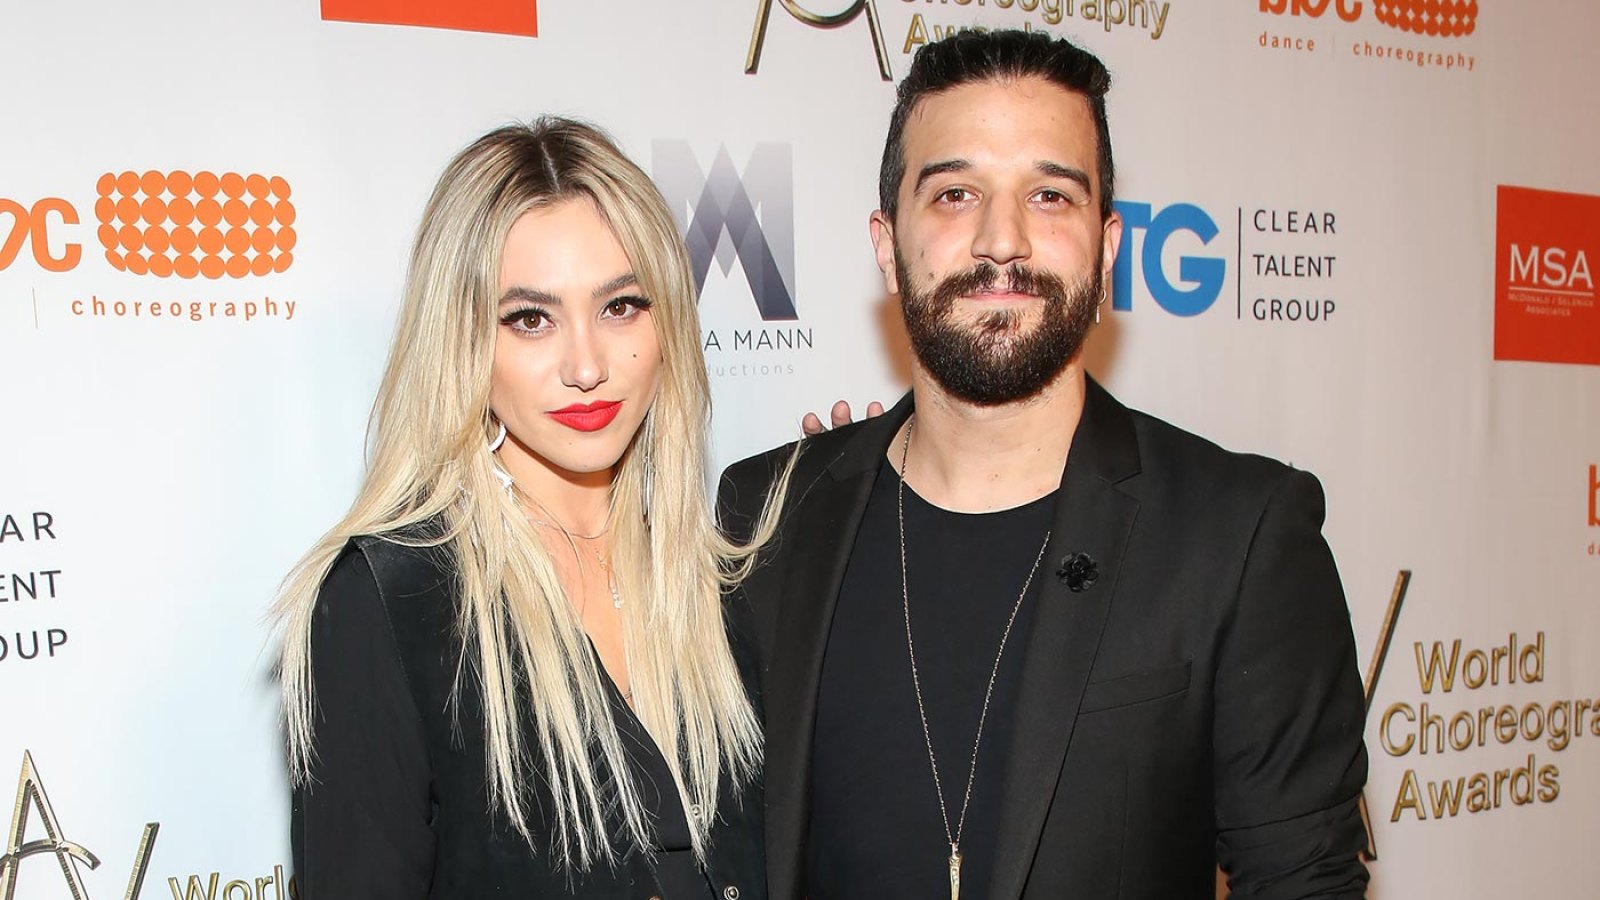 Dancing With the Stars Mark Ballas and Wife BC Jean Suffered Miscarriage Before Current Pregnancy